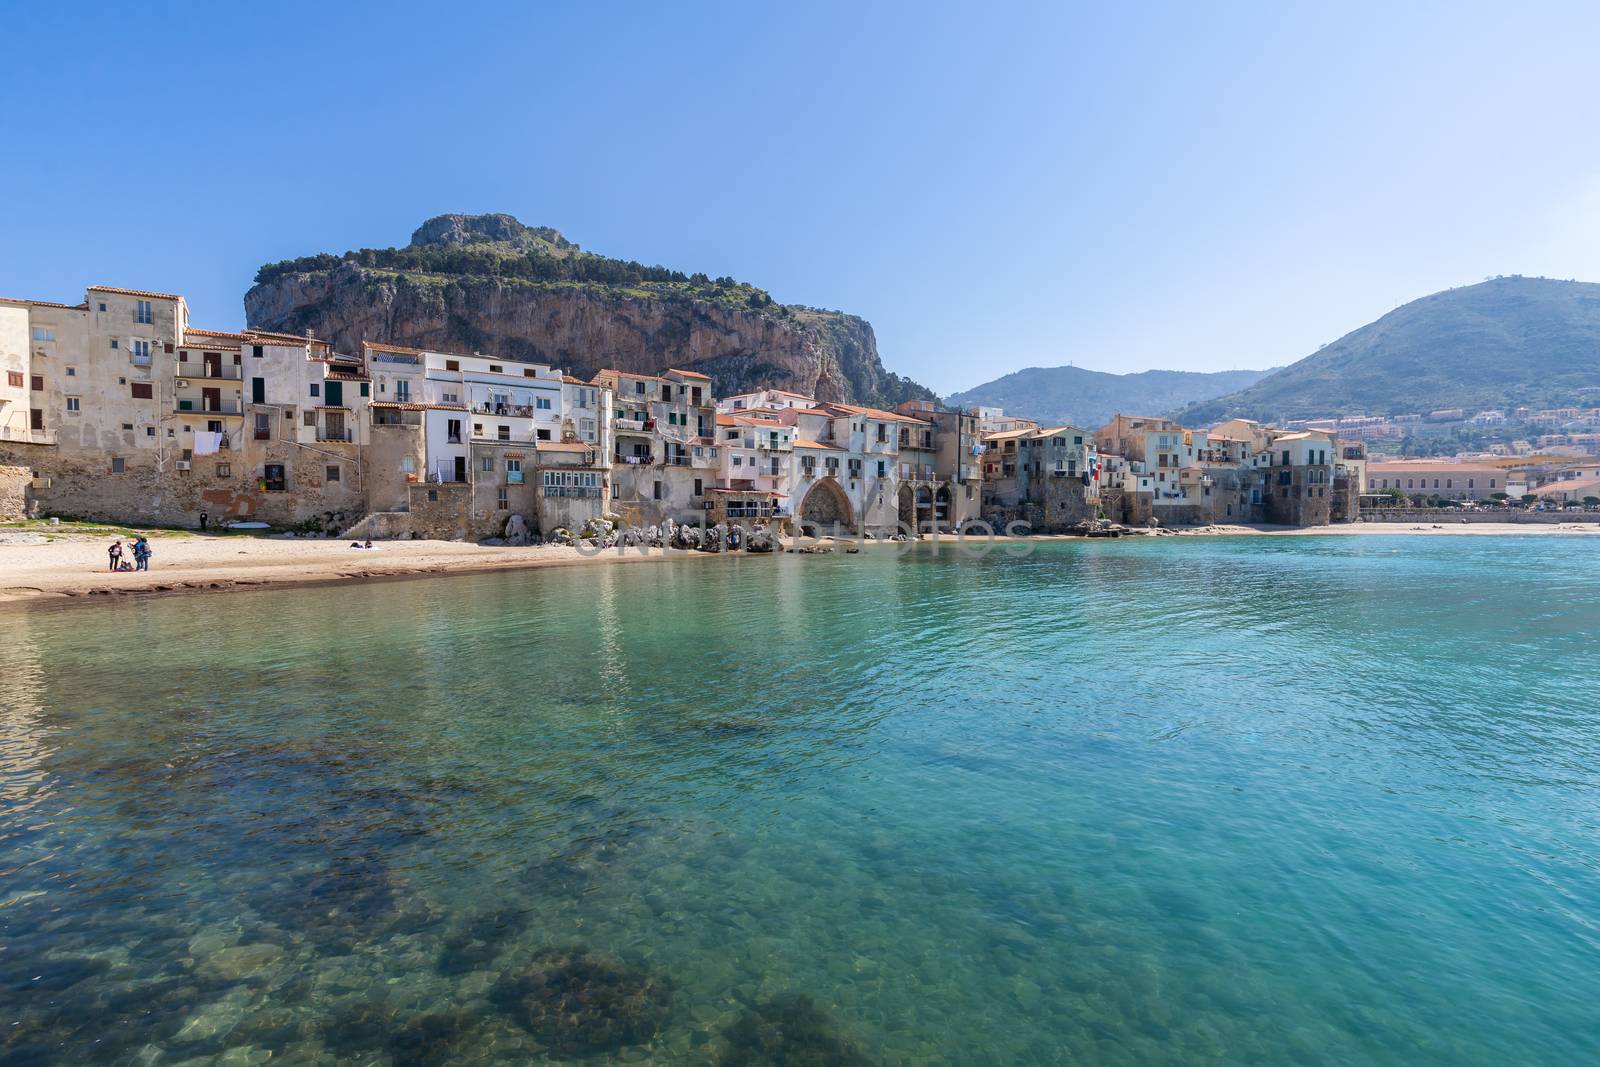 Idyllic view of turquoise sea and houses with Rocca di Cefalu rocky mountain in the background seen from historical old harbour of Cefalu - Sicily, Italy